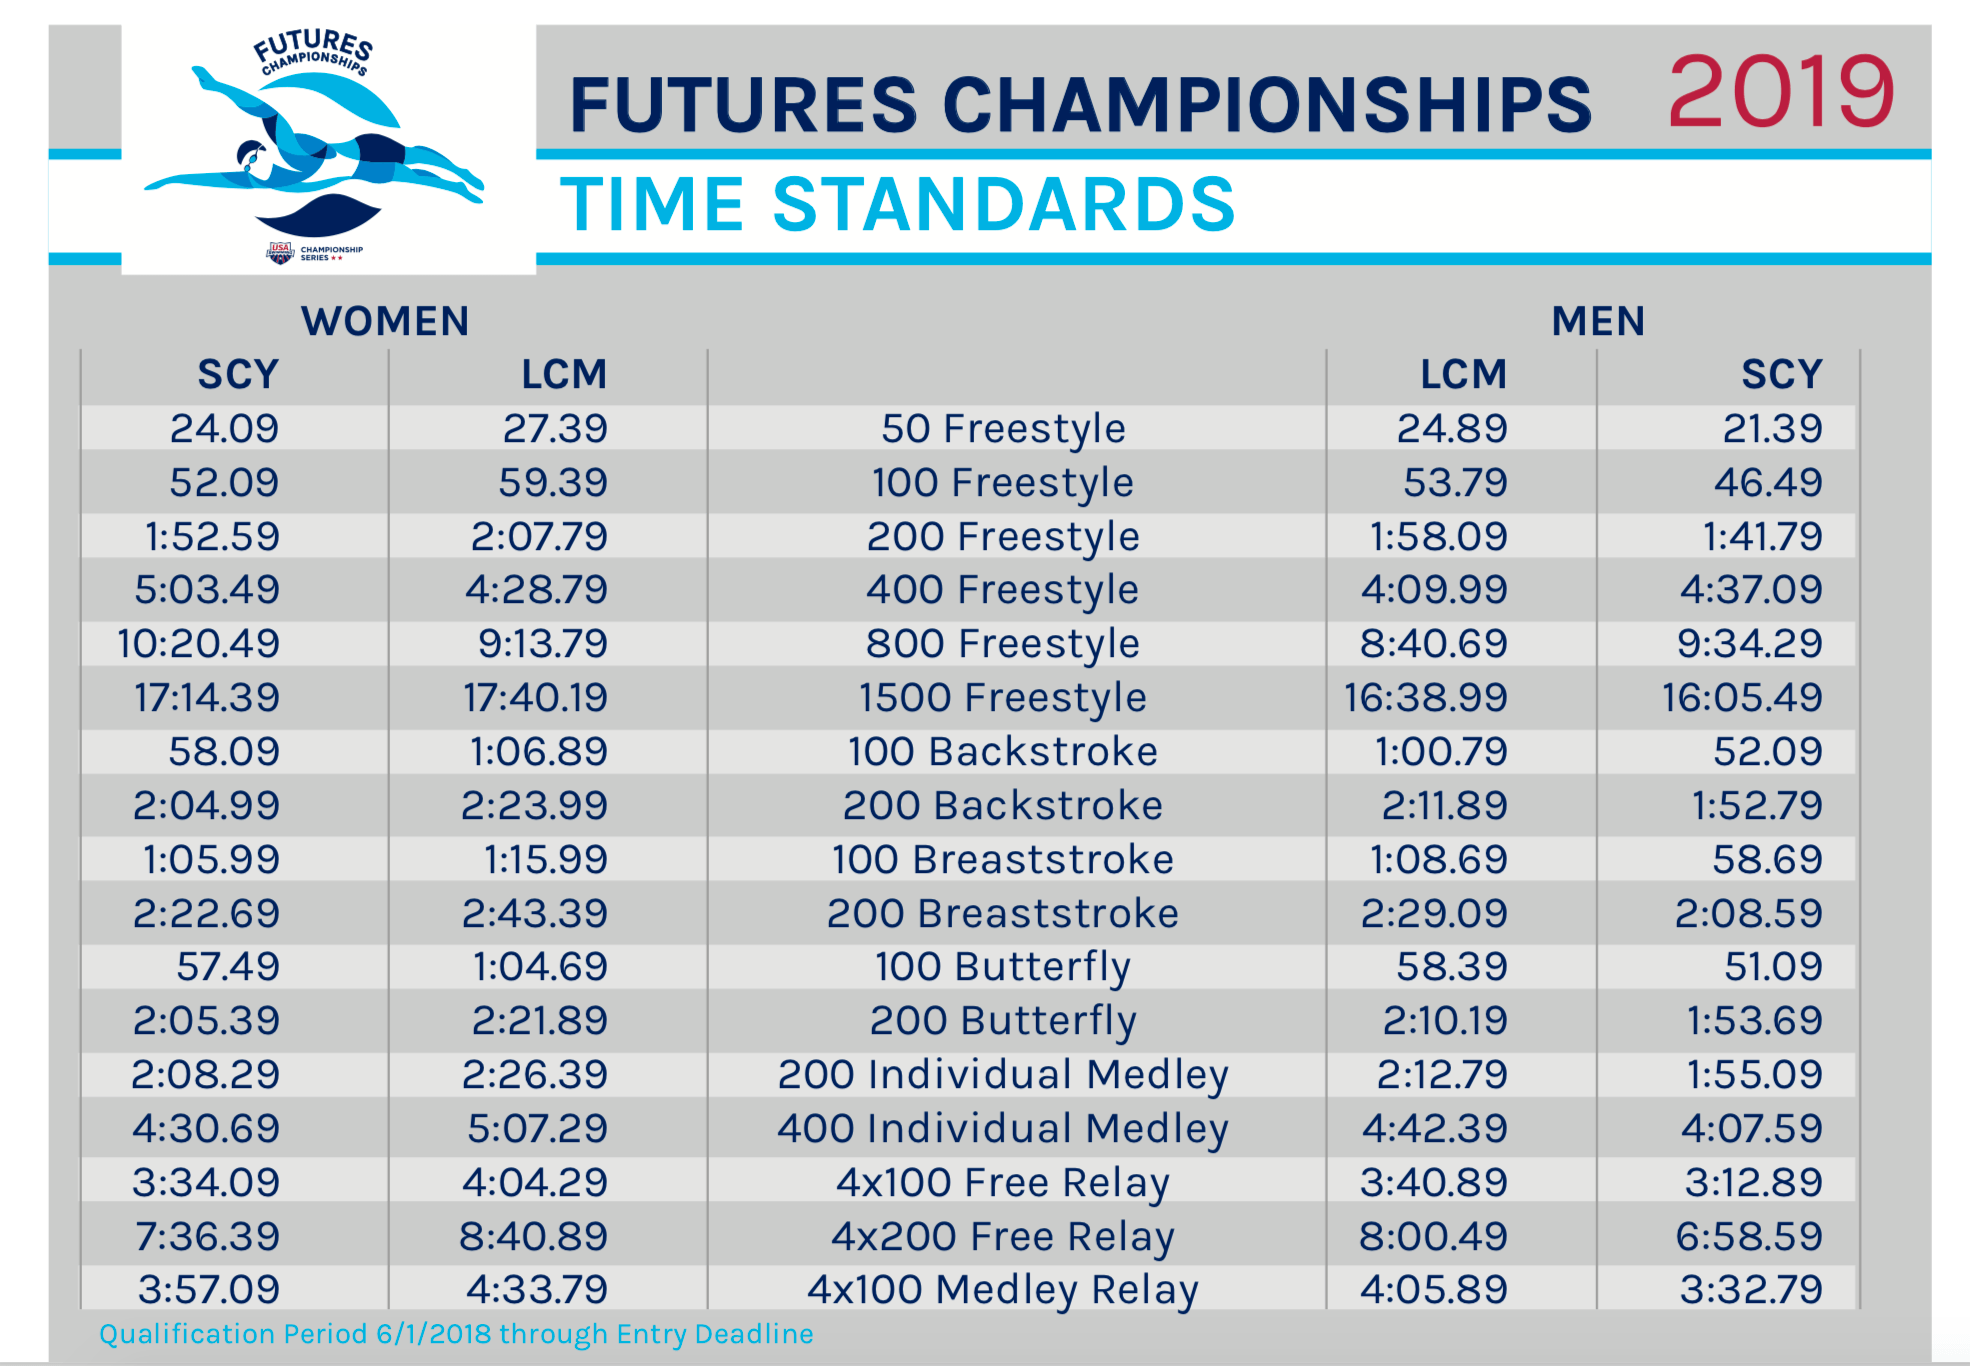 USA Swimming Releases 2019 Futures Championships Time Standards